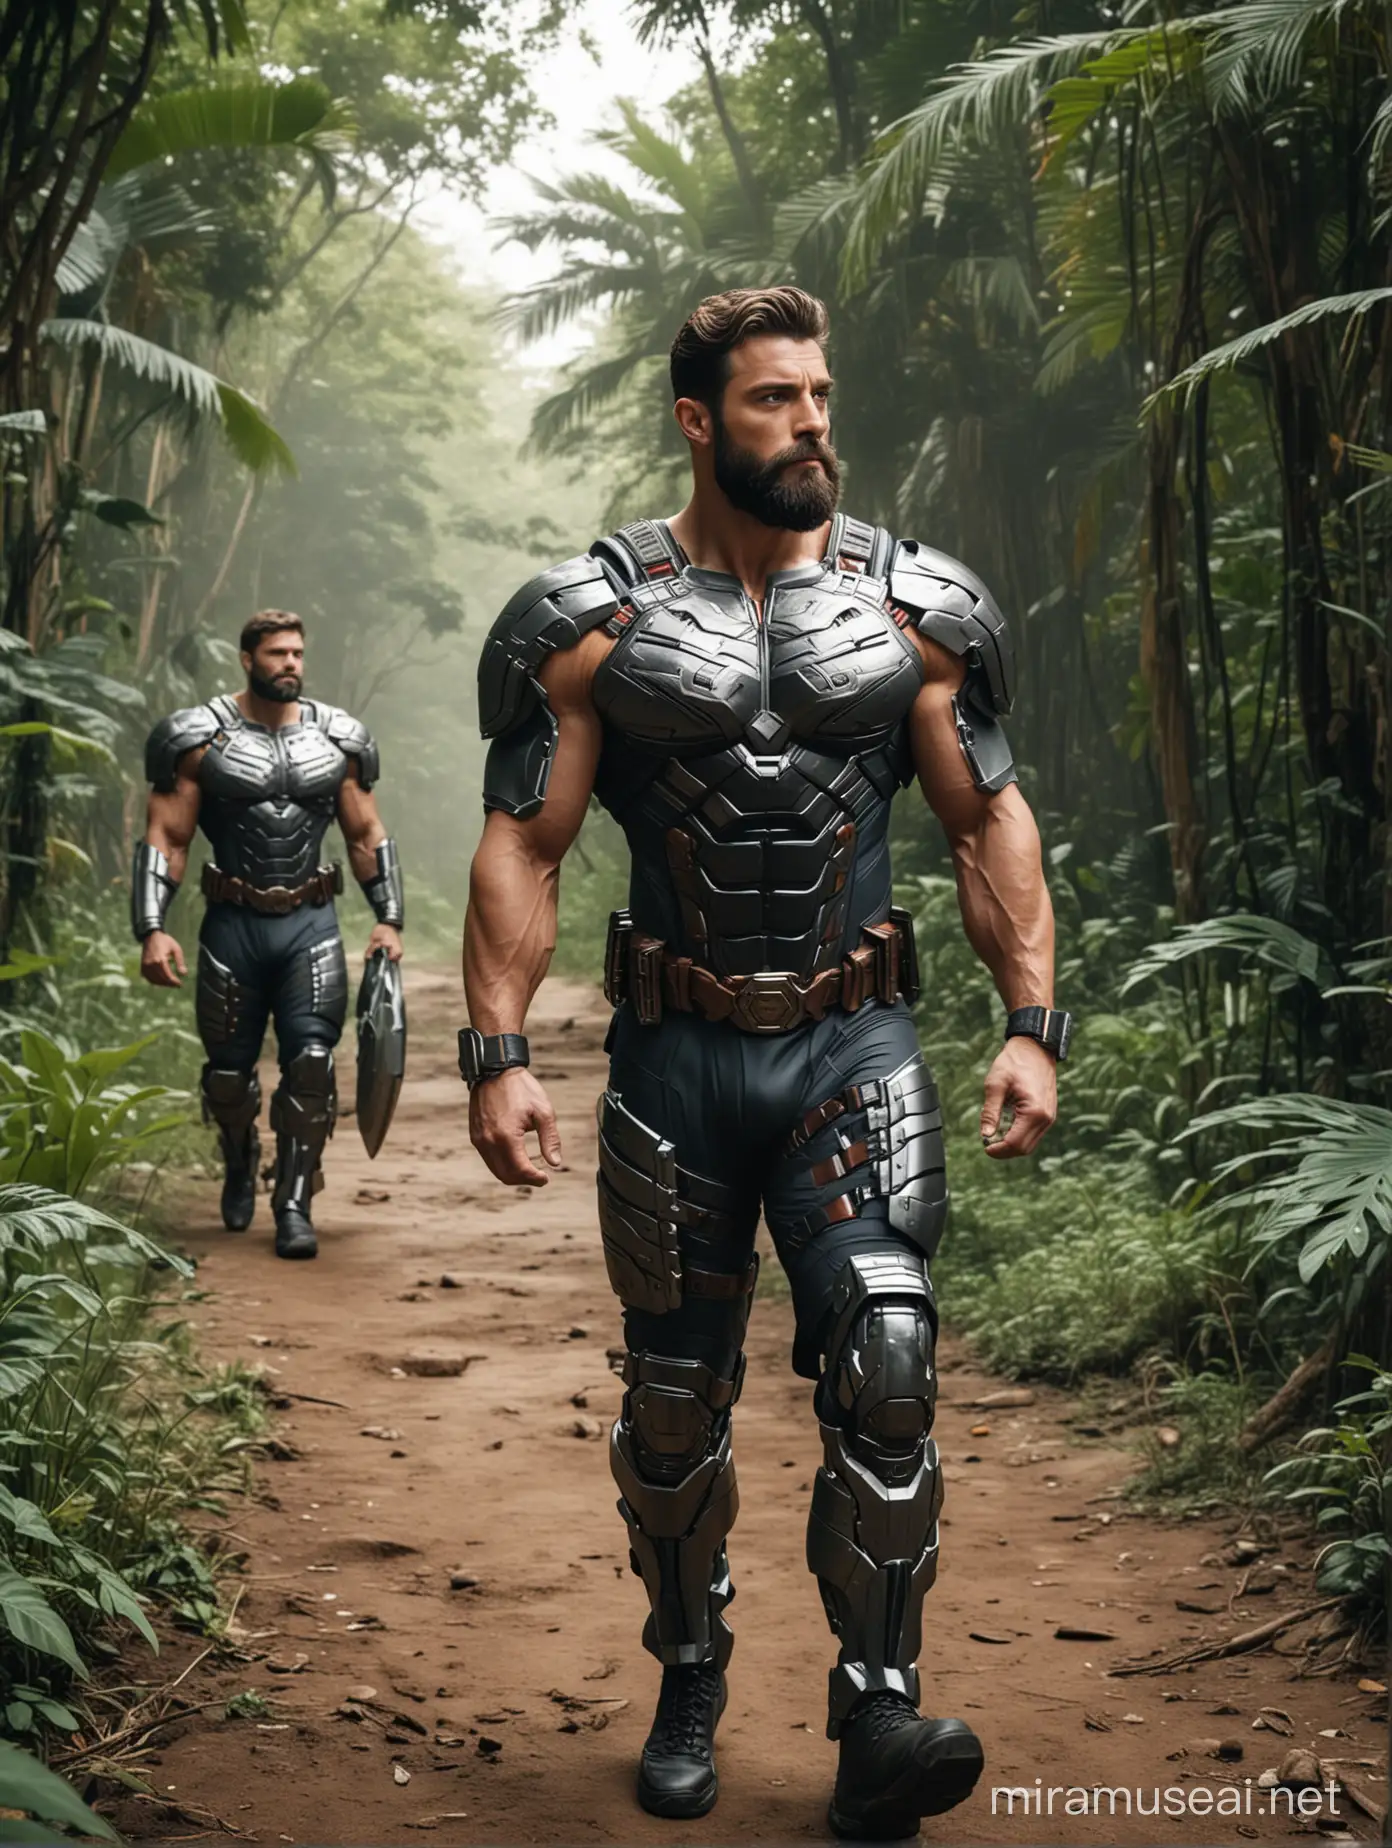 Tall and handsome muscular Supermen with beautiful hairstyle and beard and Big wide shoulder and chest in modern High tech armour suit walking in jungle 